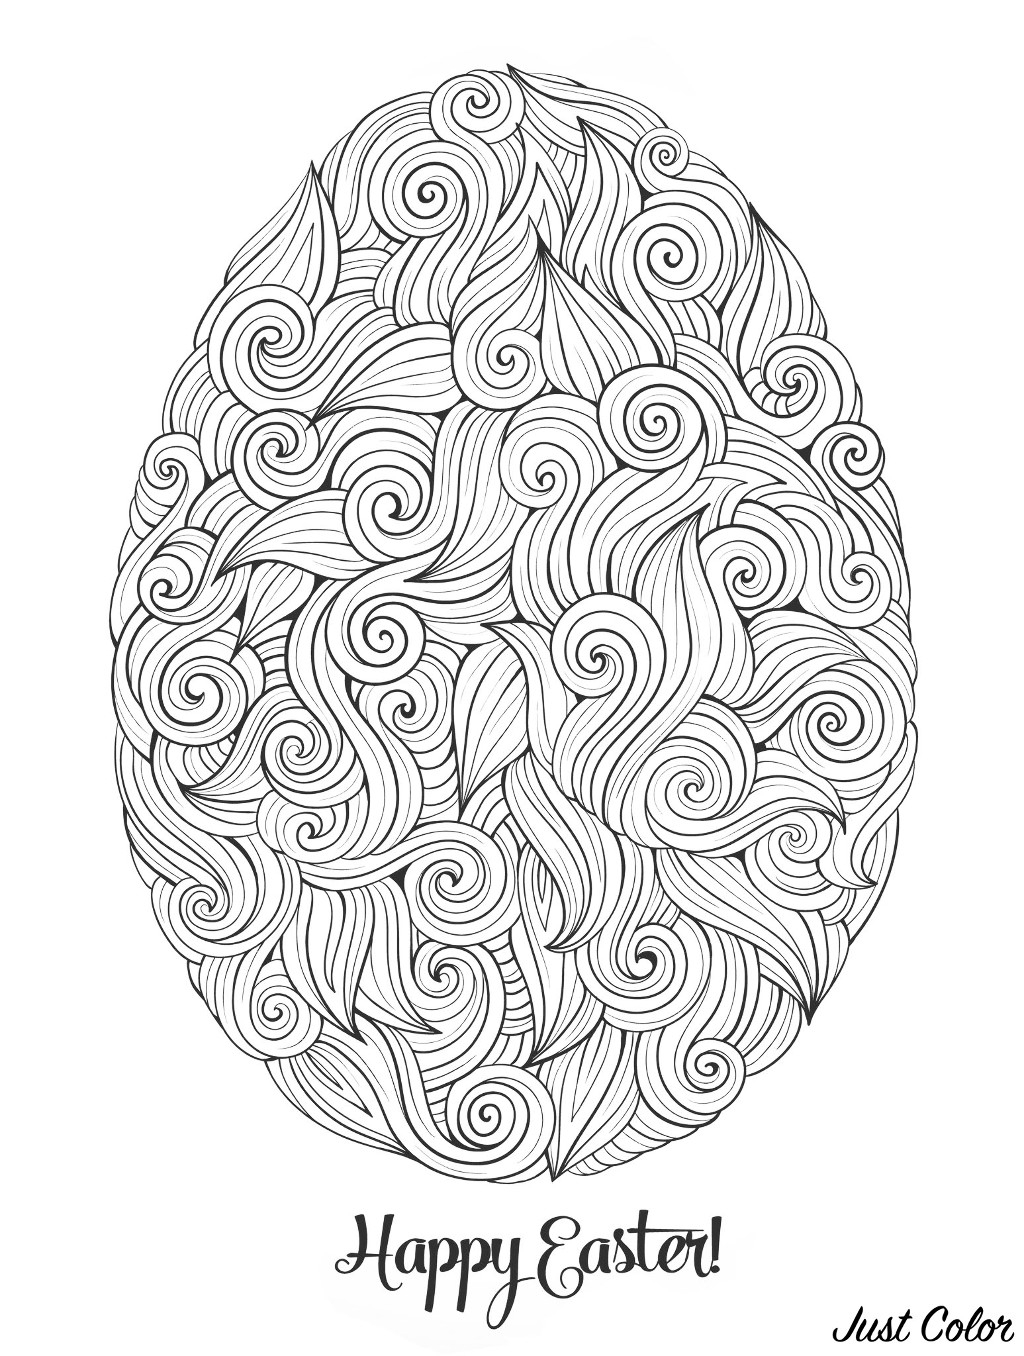 Easter Egg Coloring Page Easter Egg Easter Adult Coloring Pages